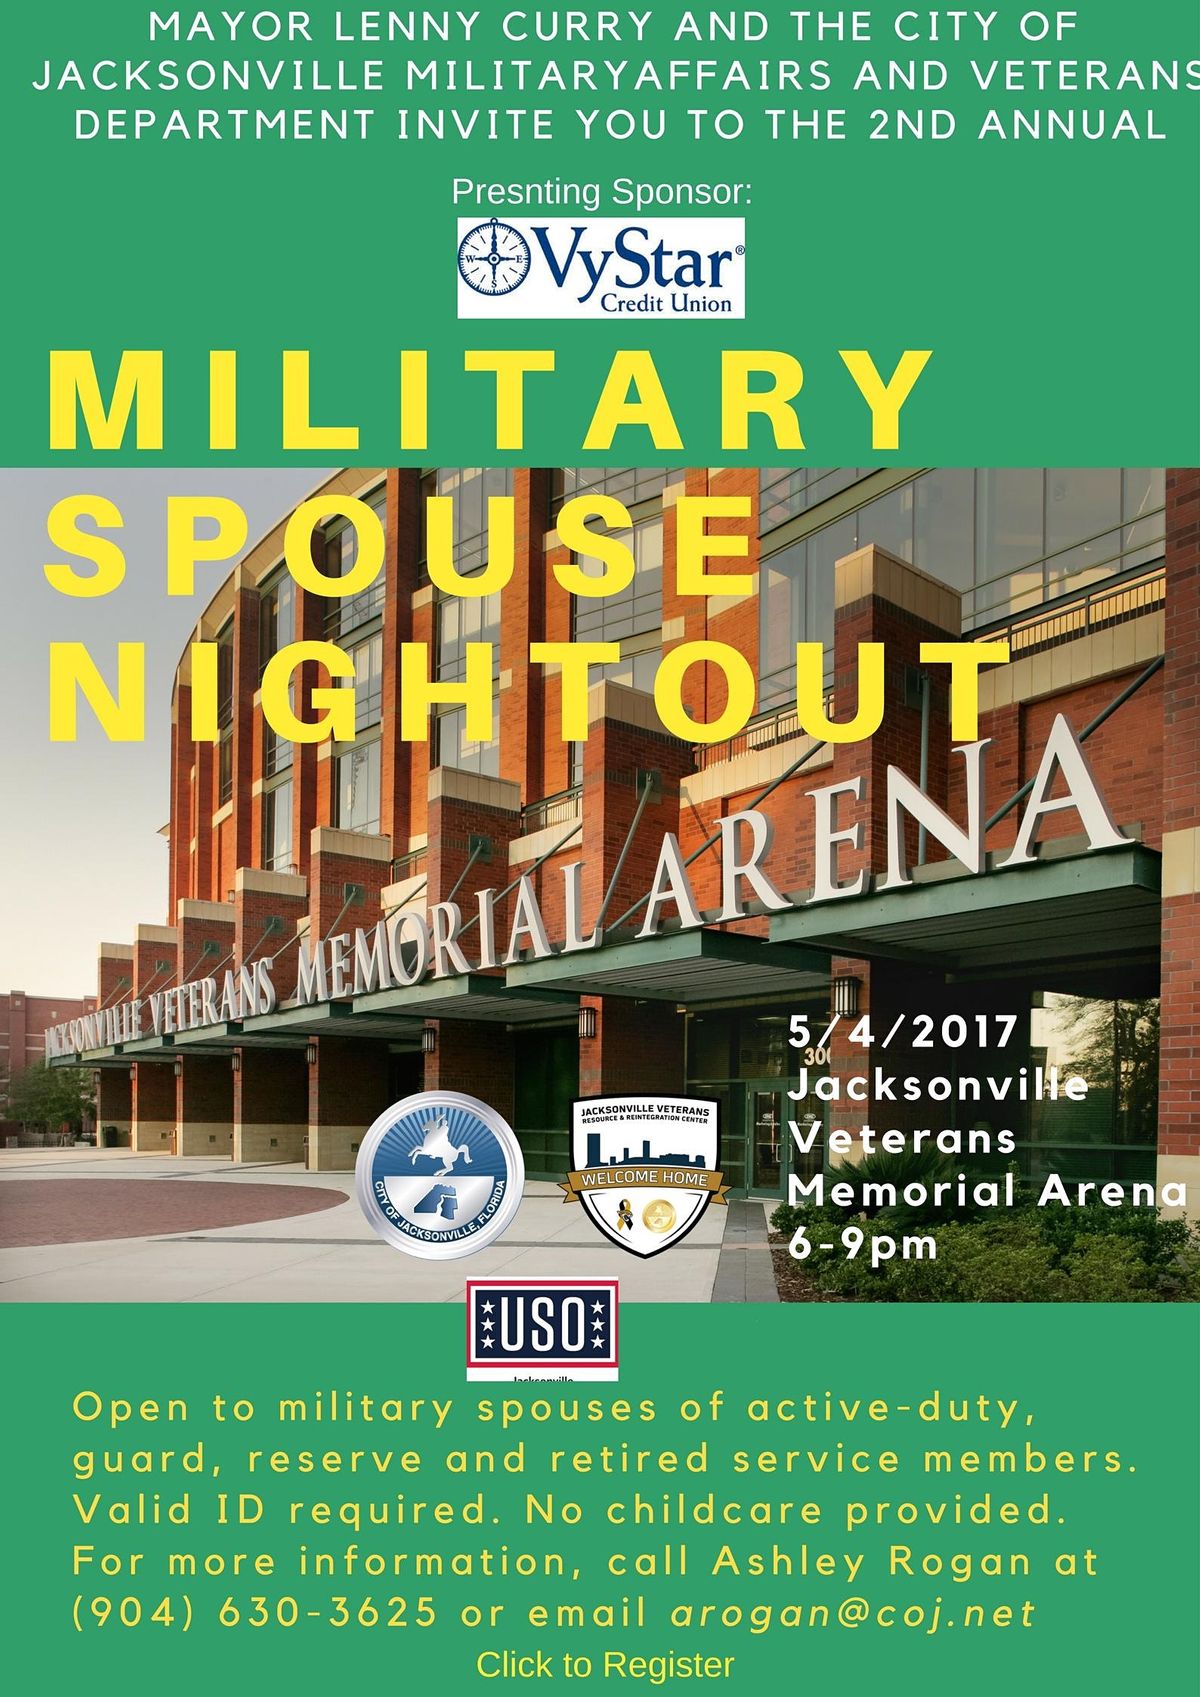 Annual Military Spouse Night Out